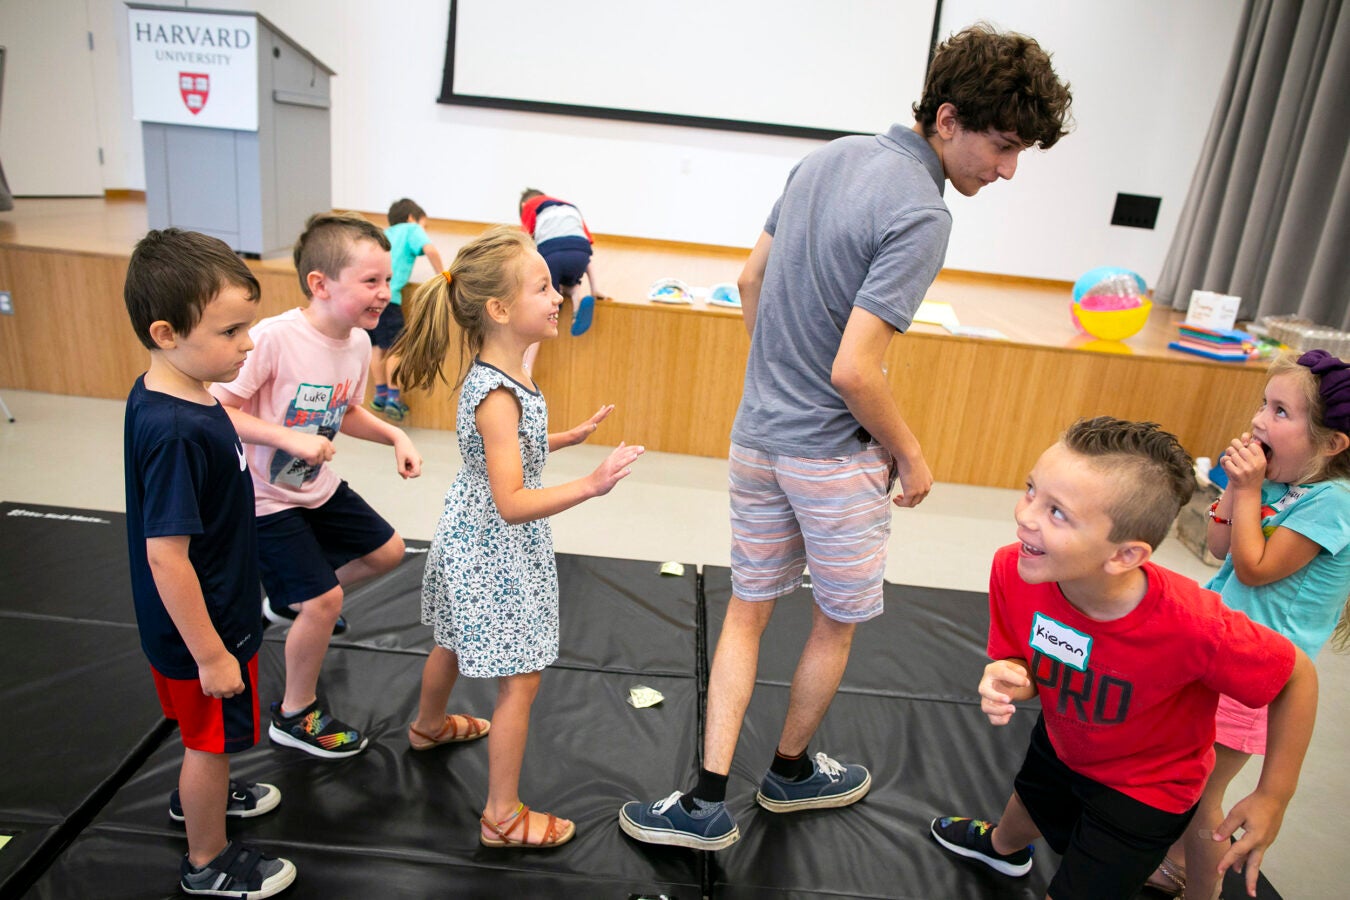 James DiSandro plays with children during acting class.